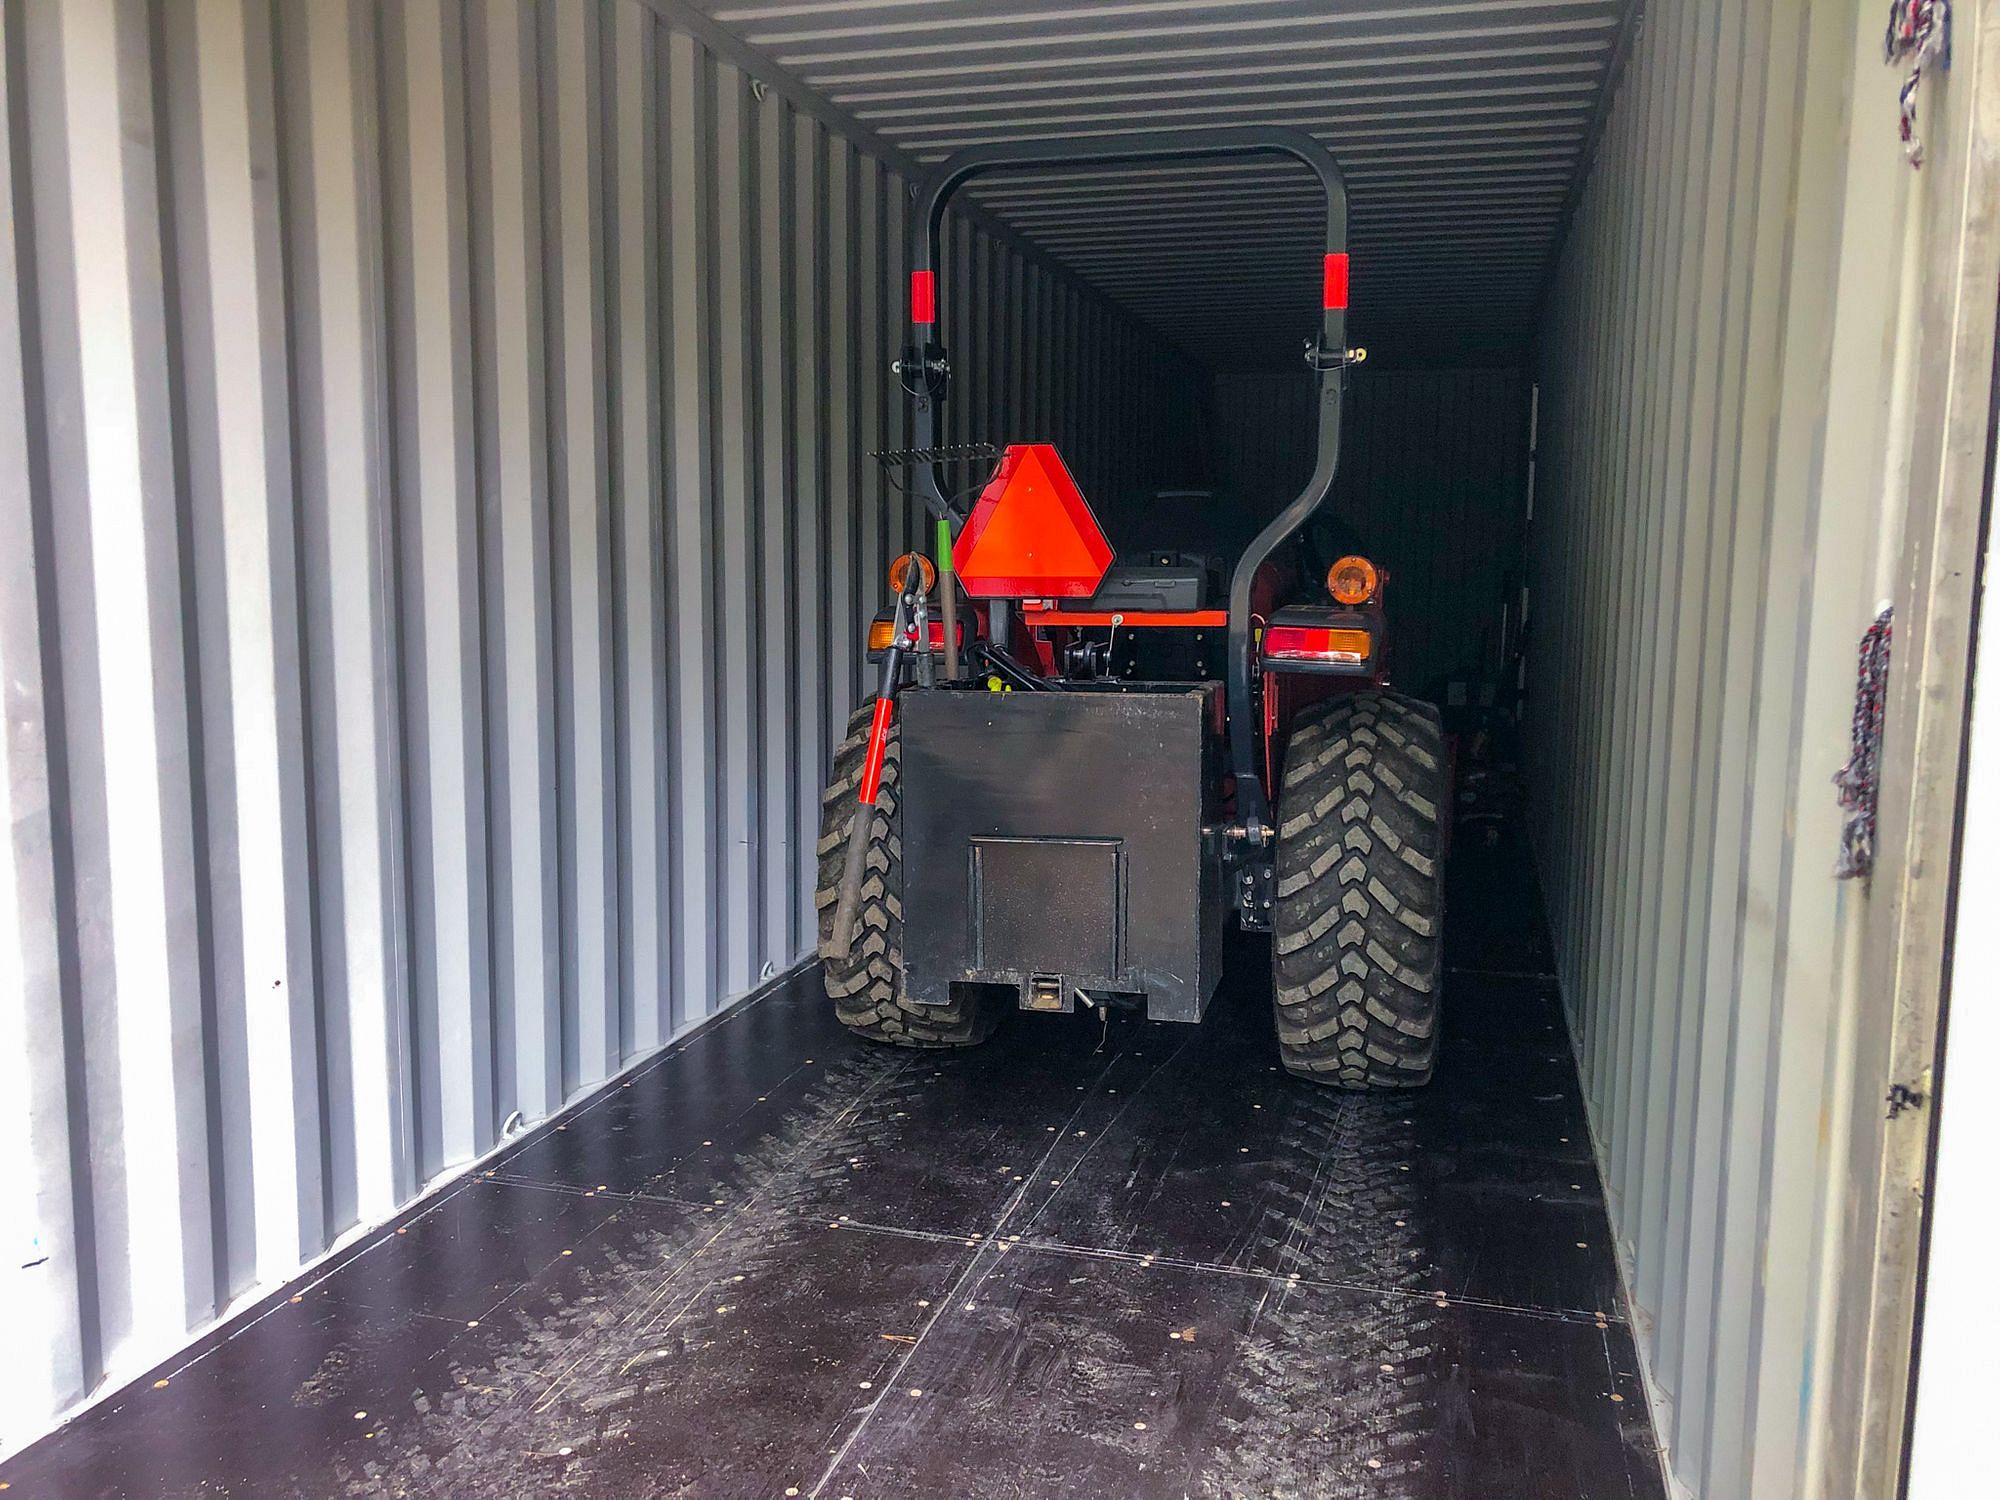 Kubota L3901 Tractor in Shipping Container